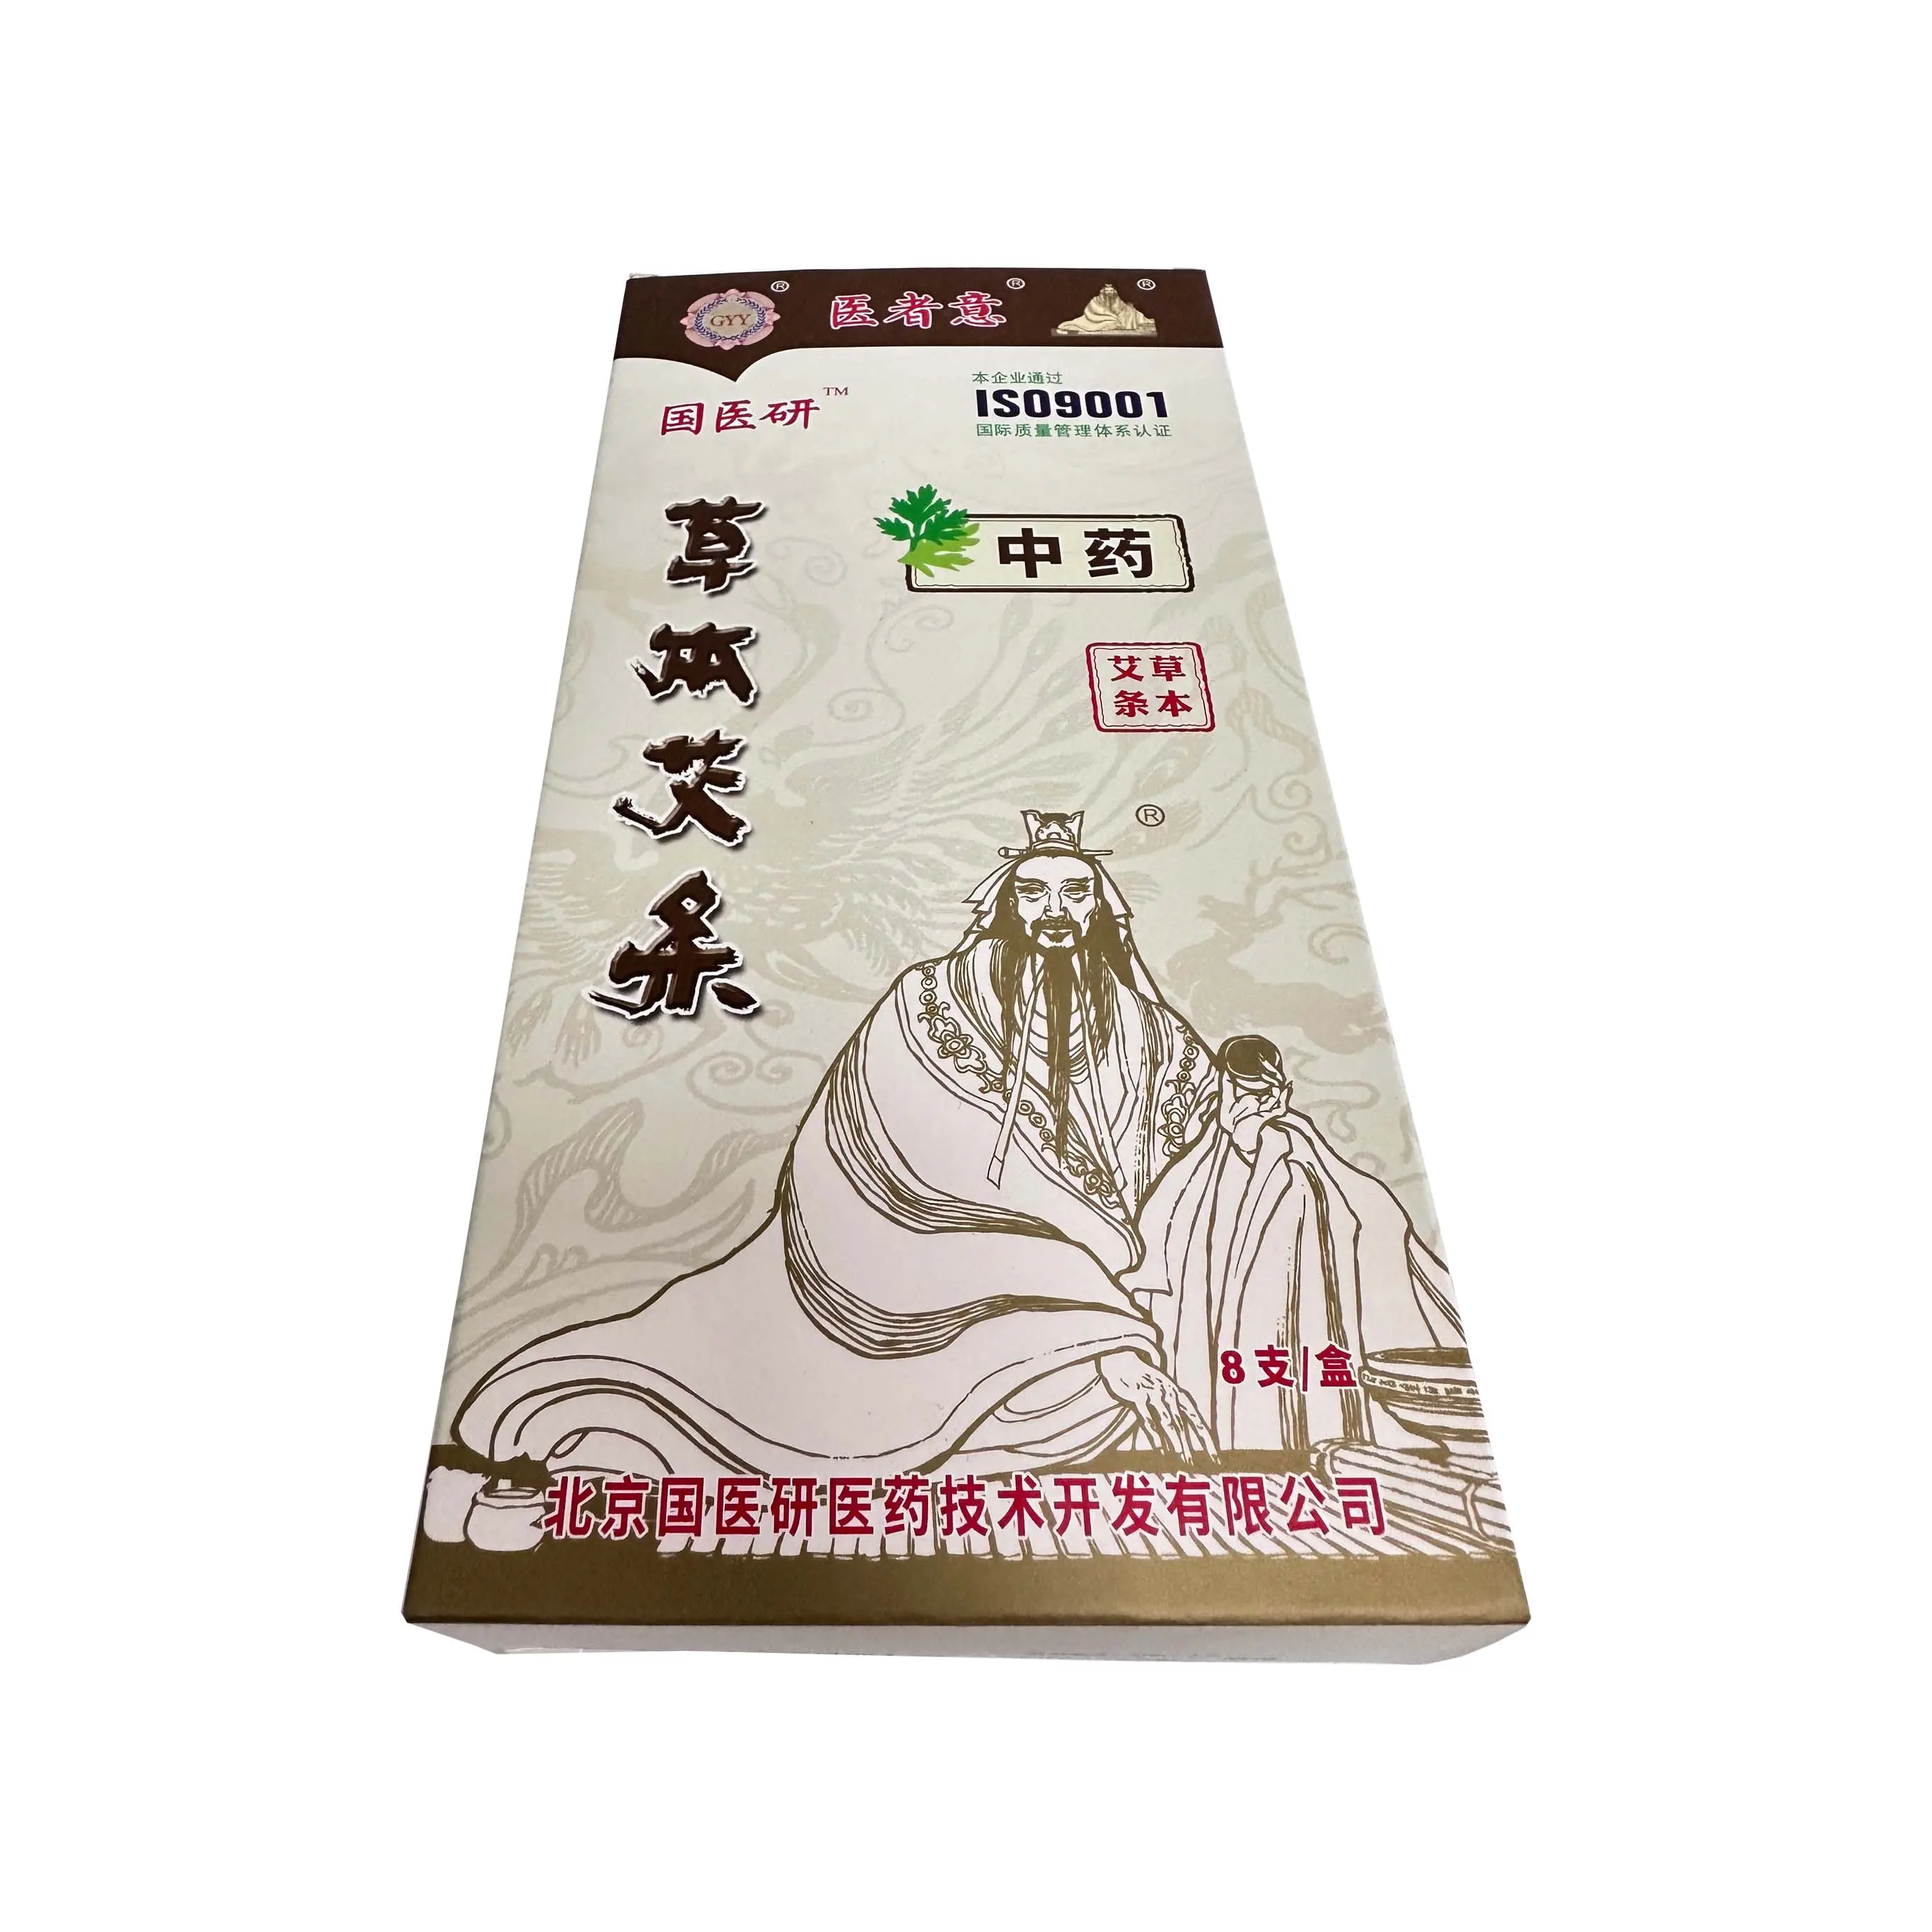 GUOYIYAN Chinese Herbal Medicine Traditional Moxibustion Stick 3:1 Moxa Rolls Thick Moxa Stick Plus Additional Herbs